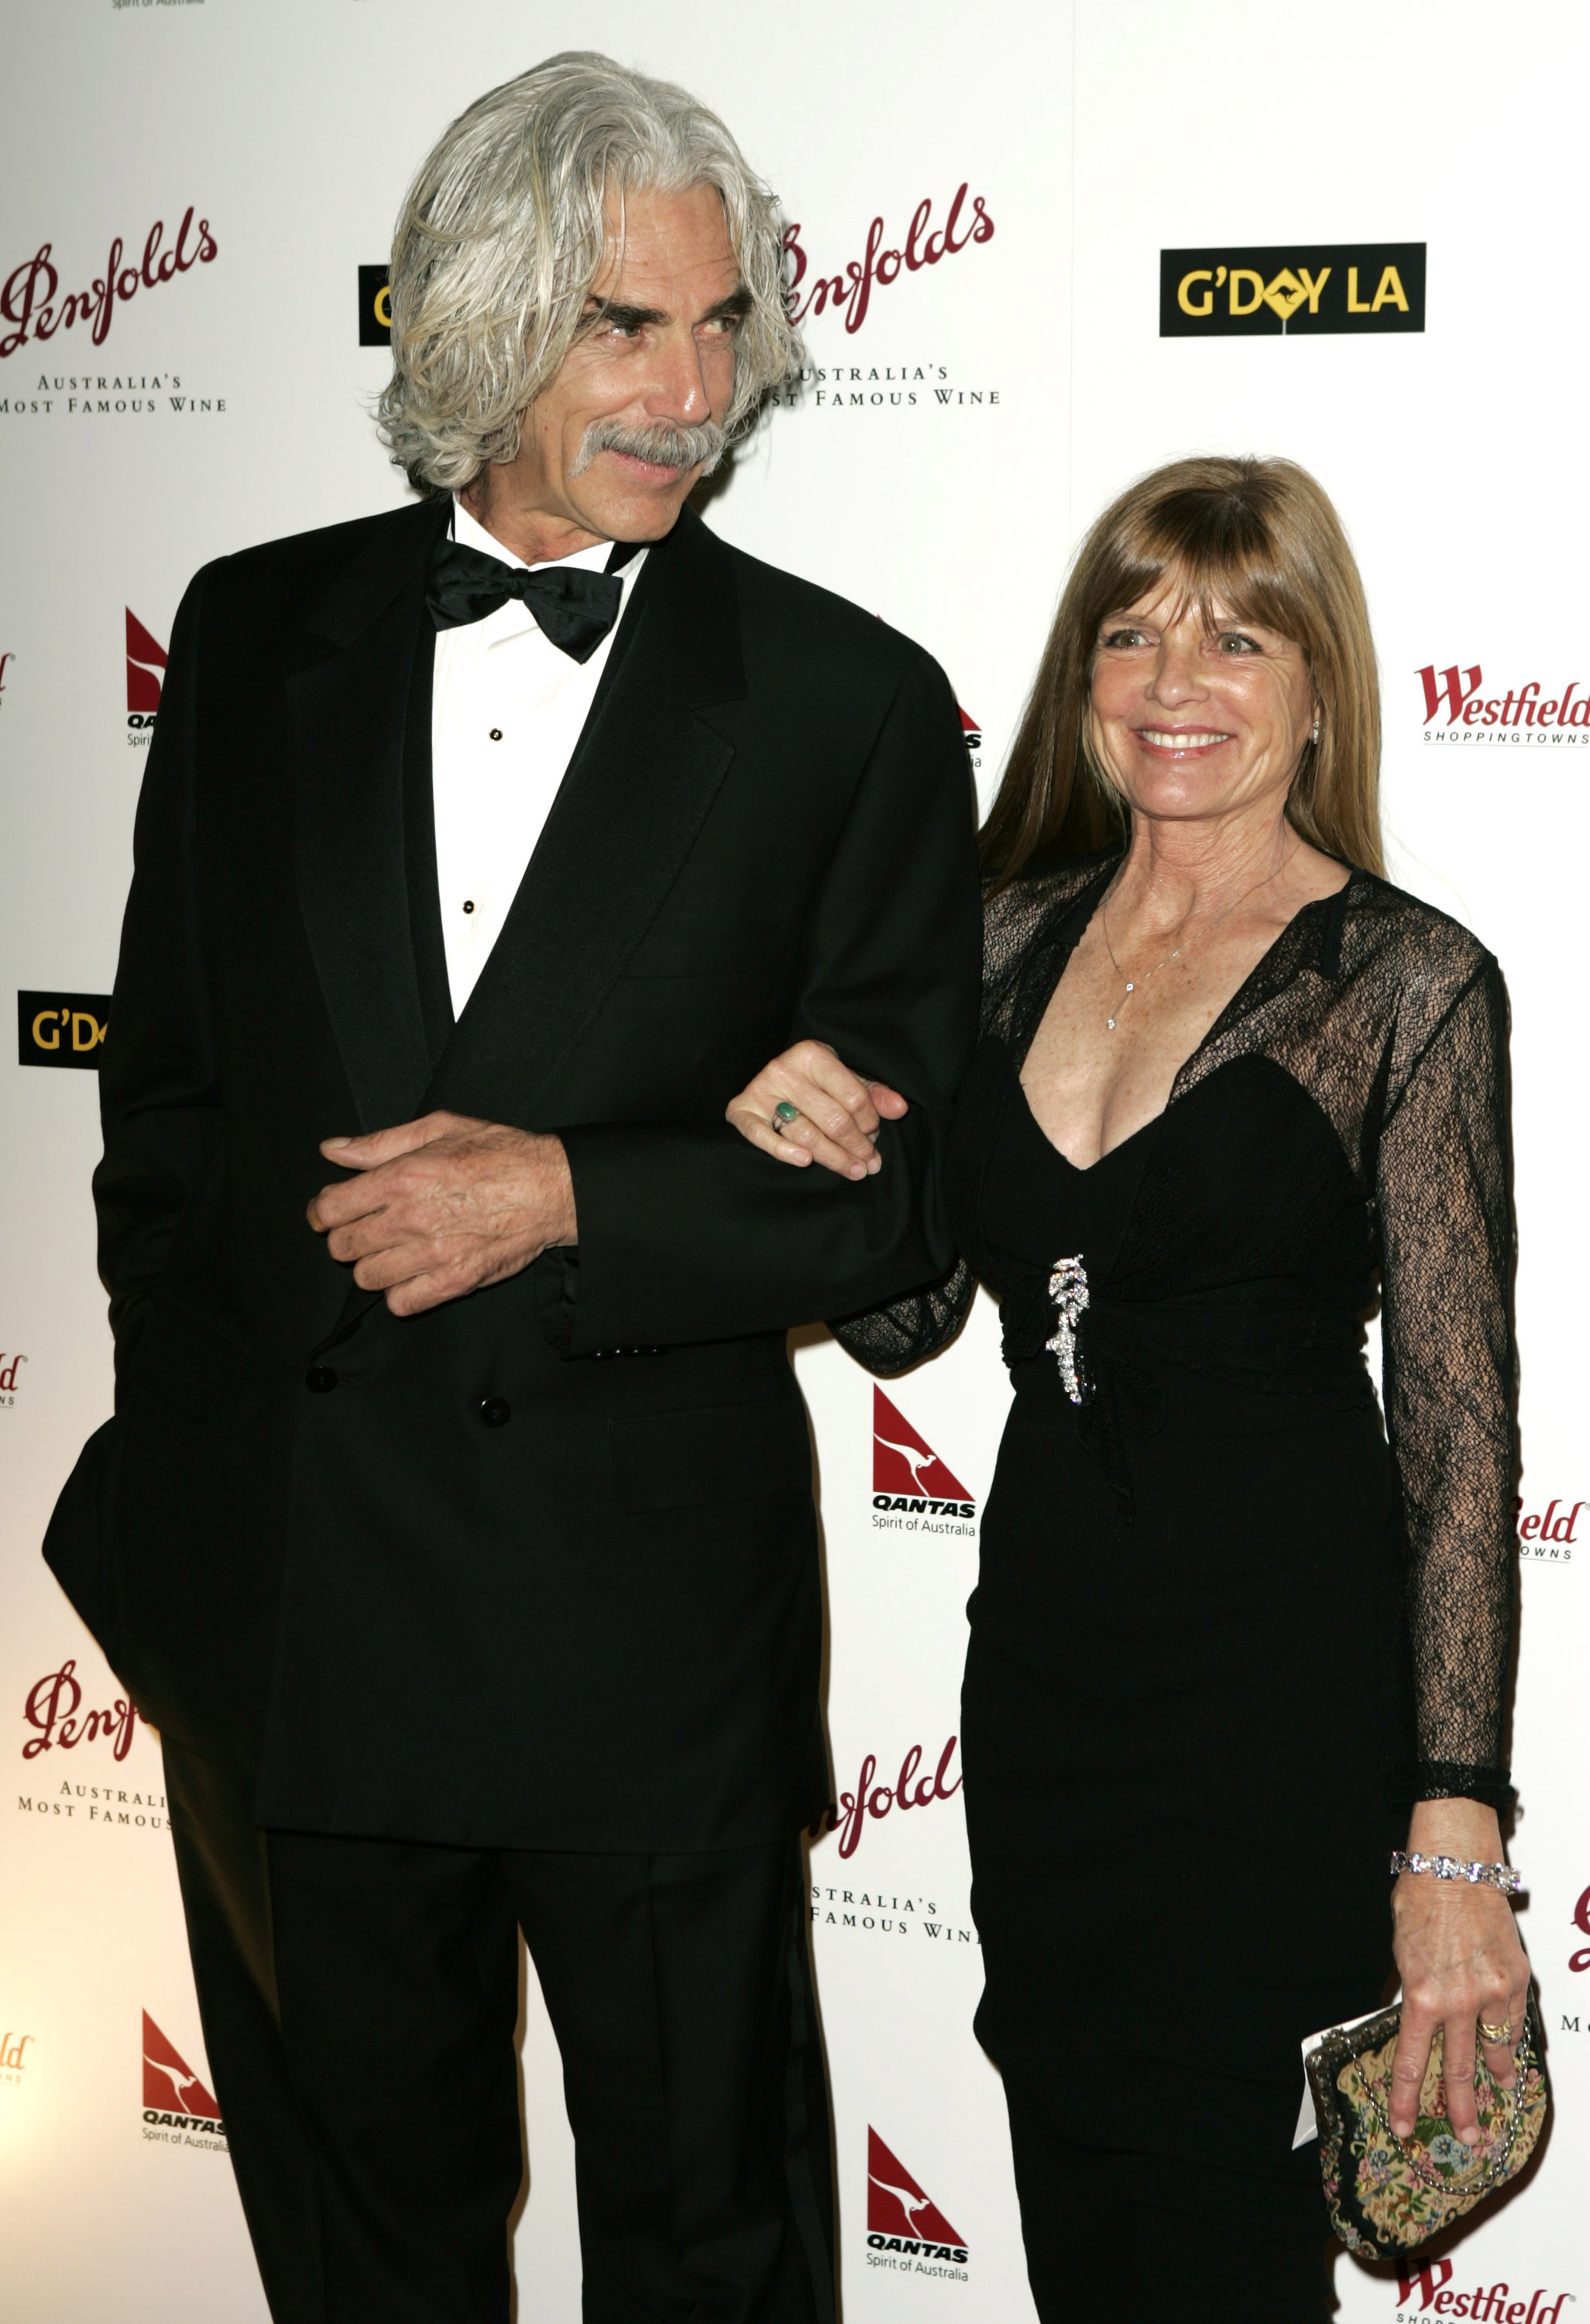 Sam Elliott and his wife Katherine Ross at the Penfolds Gala Black Tie Dinner in California in 2005 | Source: Getty Images